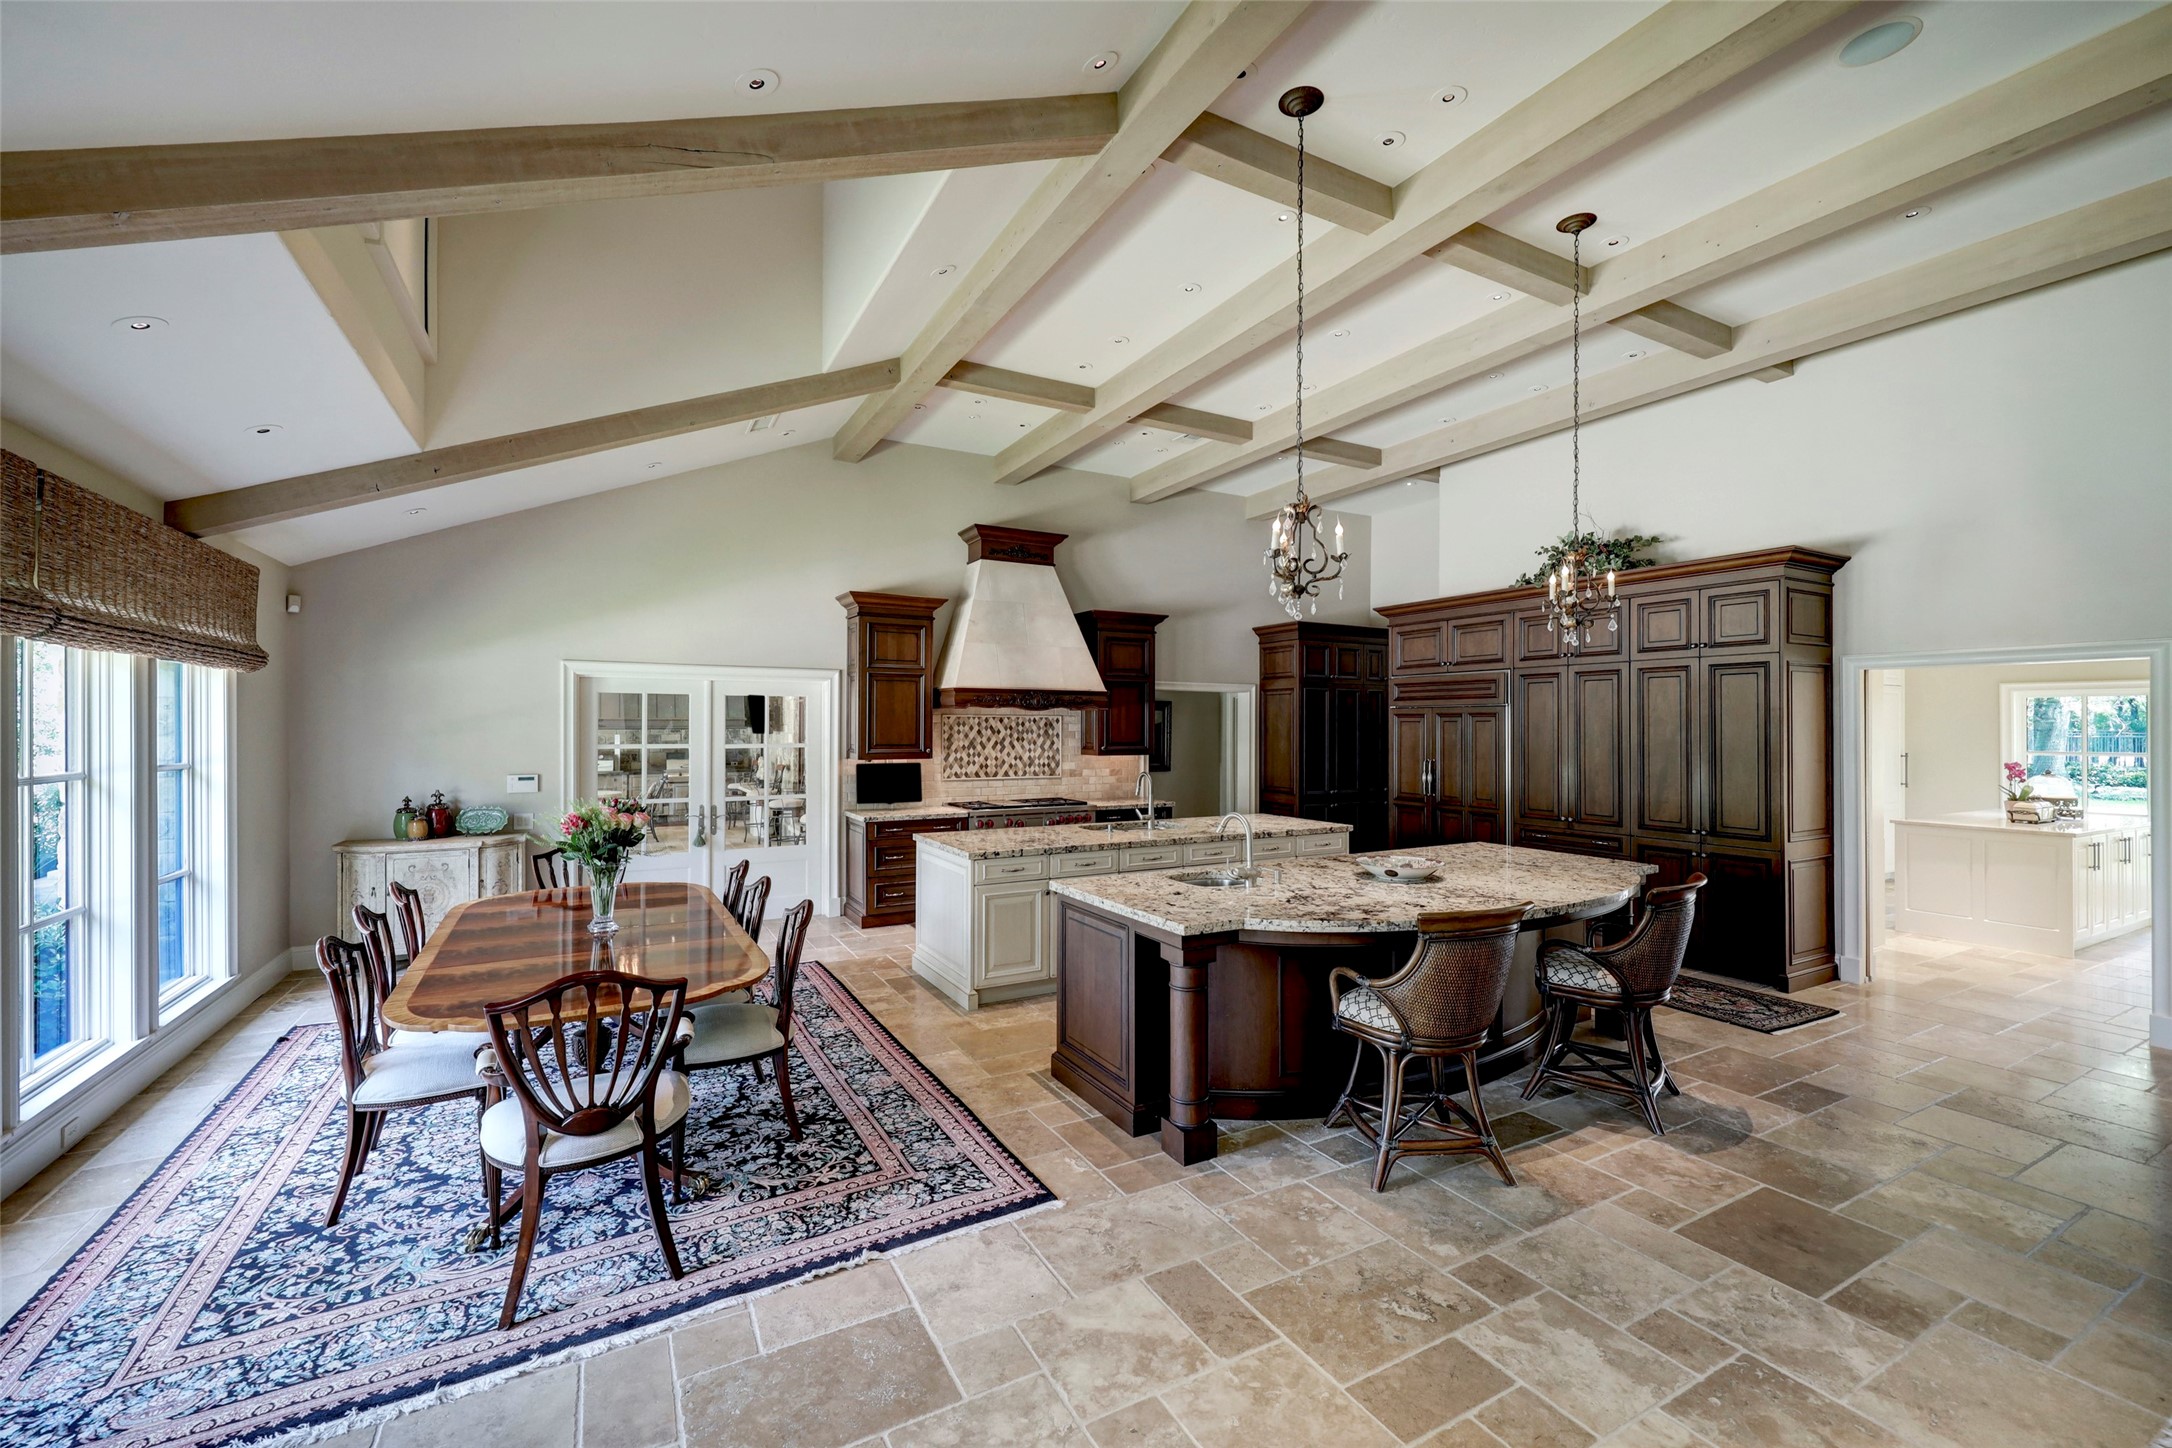 The dining room and kitchen open seamlessly for today's entertaining.